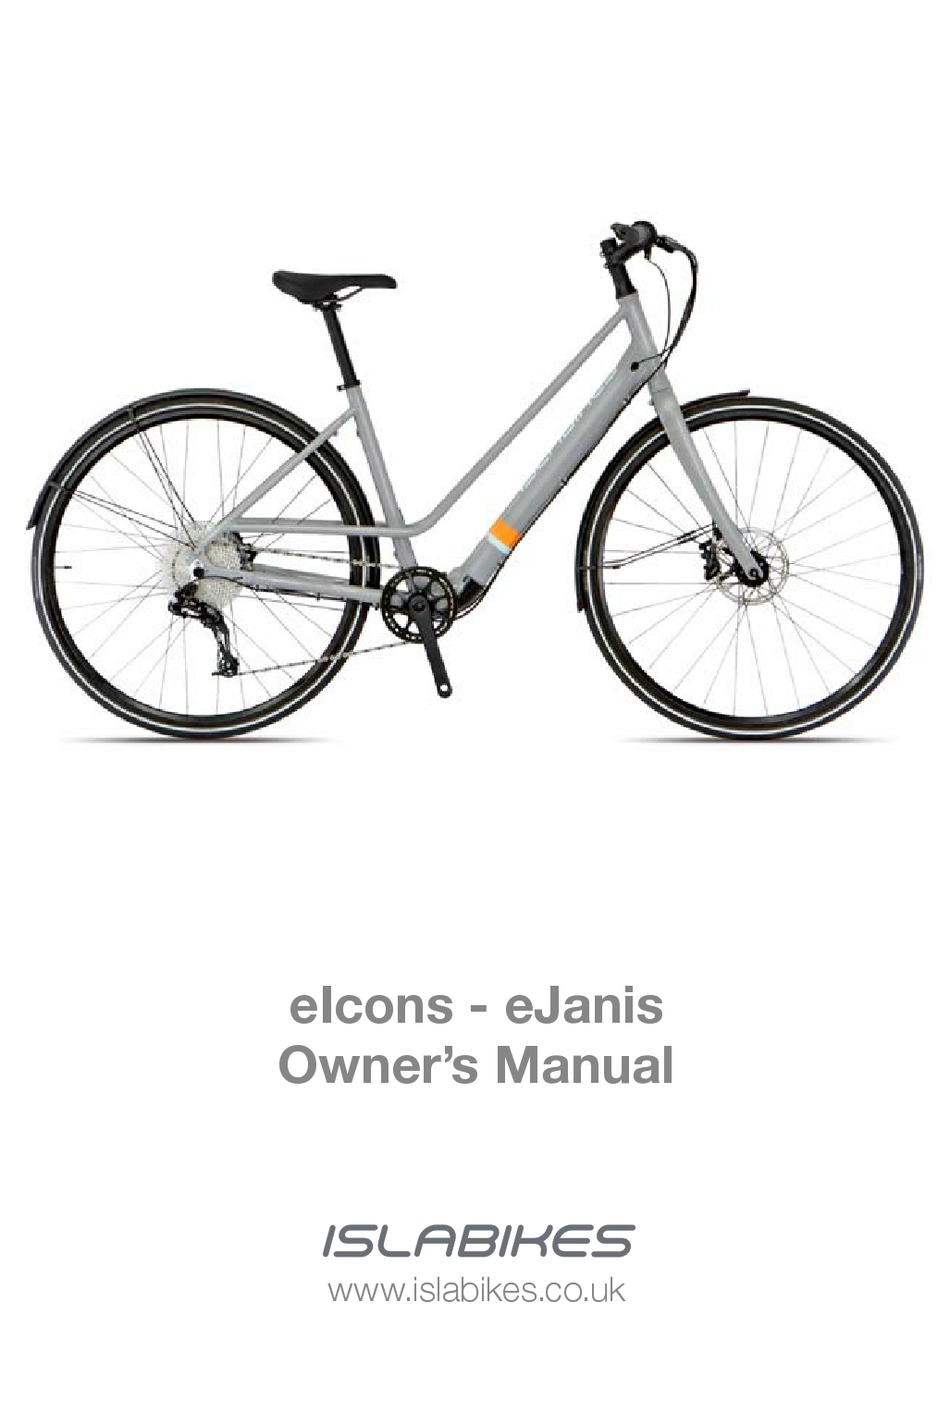 islabikes outlet